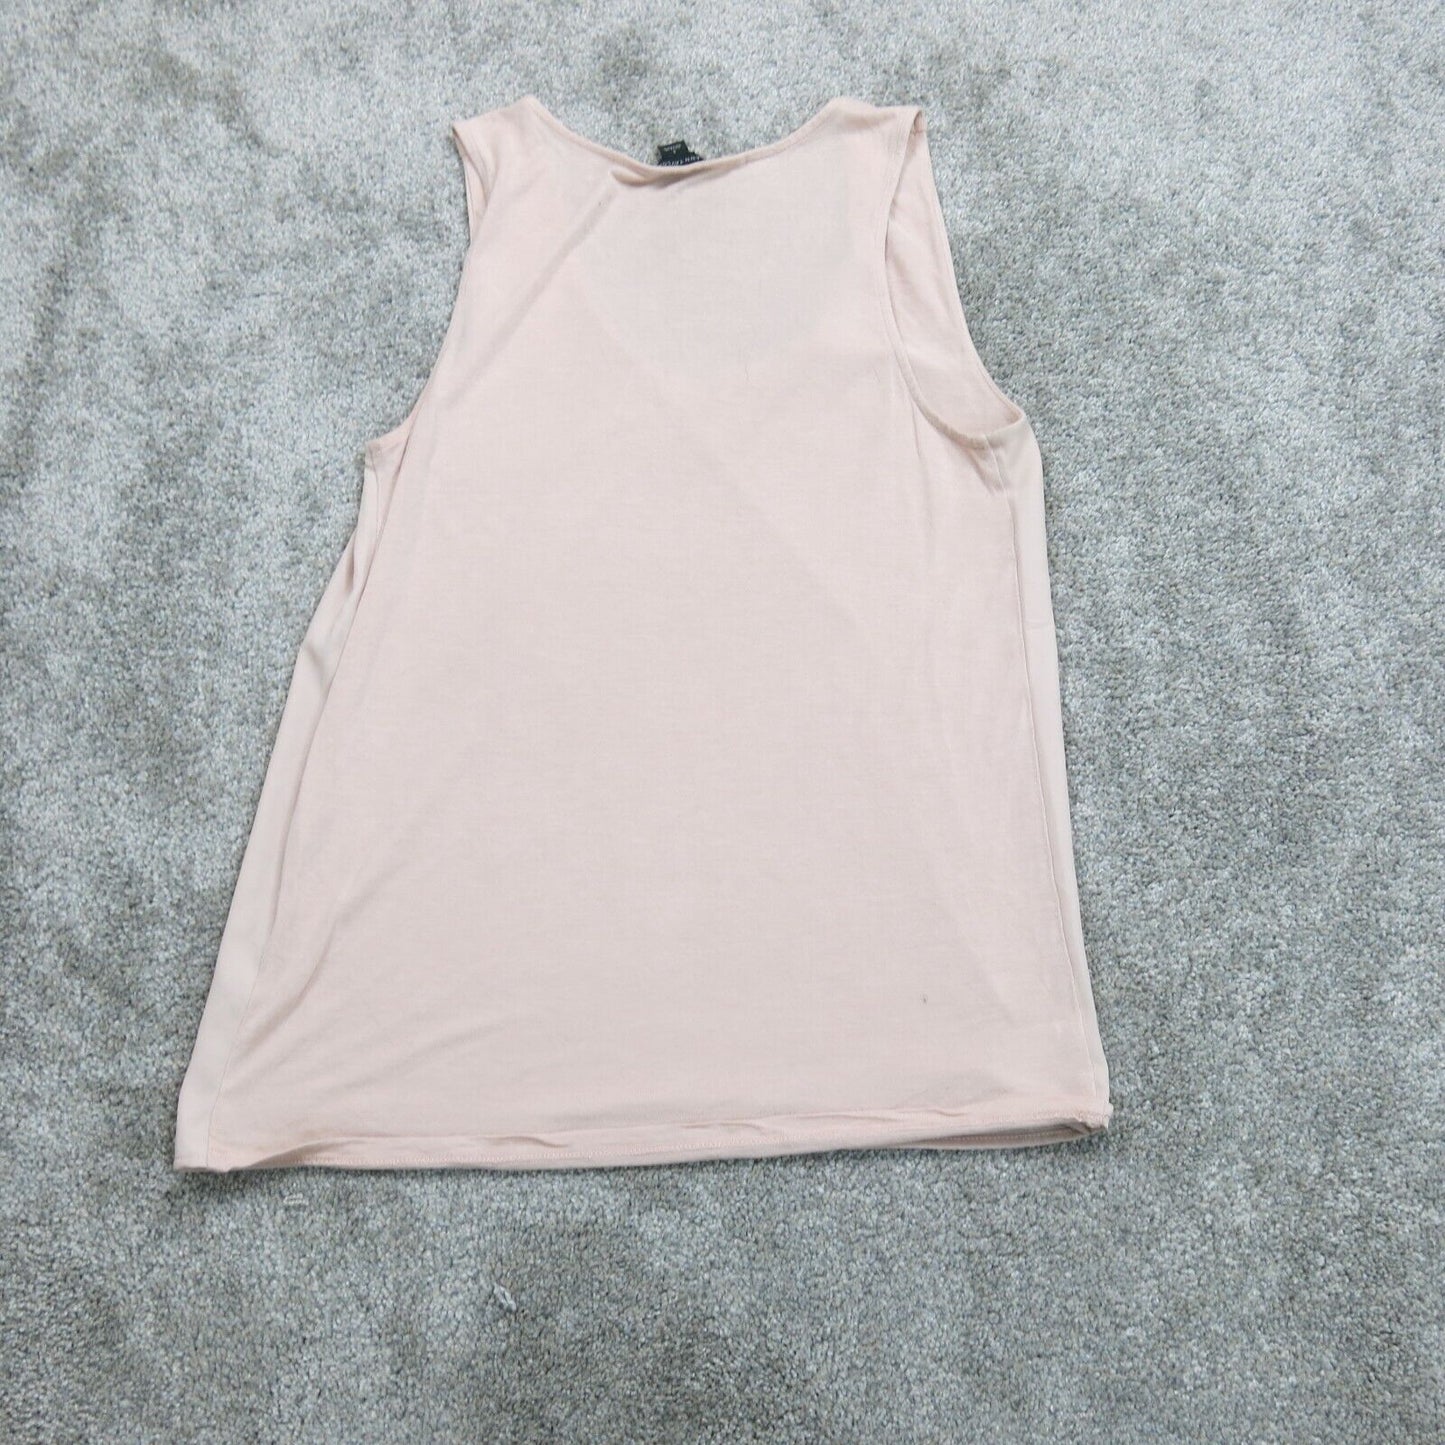 Ann Taylor Womens Career Blouse Top Scoop Neck Sleeveless Blush Pink Size Small